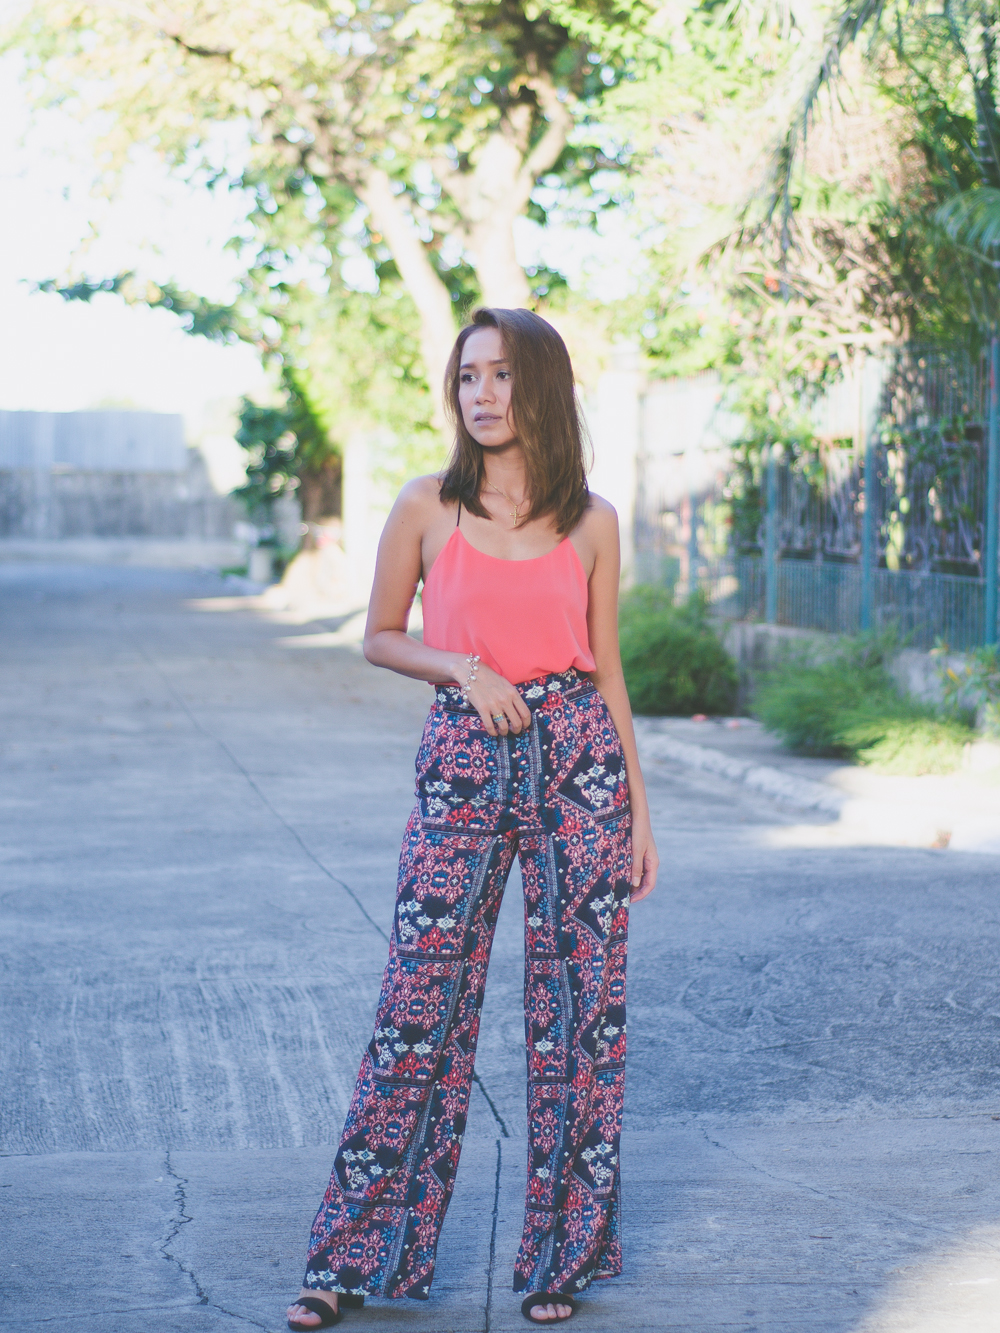 SM GTW, Coral trend 2016, color trend for 2016, H&M wide-legged pants, summer outfit, happy hour outfit, white label bridal cebu, adhesive bra, white label intimates, sticky bras, Cebu Fashion Blogger, Cebu Bloggers, Philippine street style, asian blogger, 